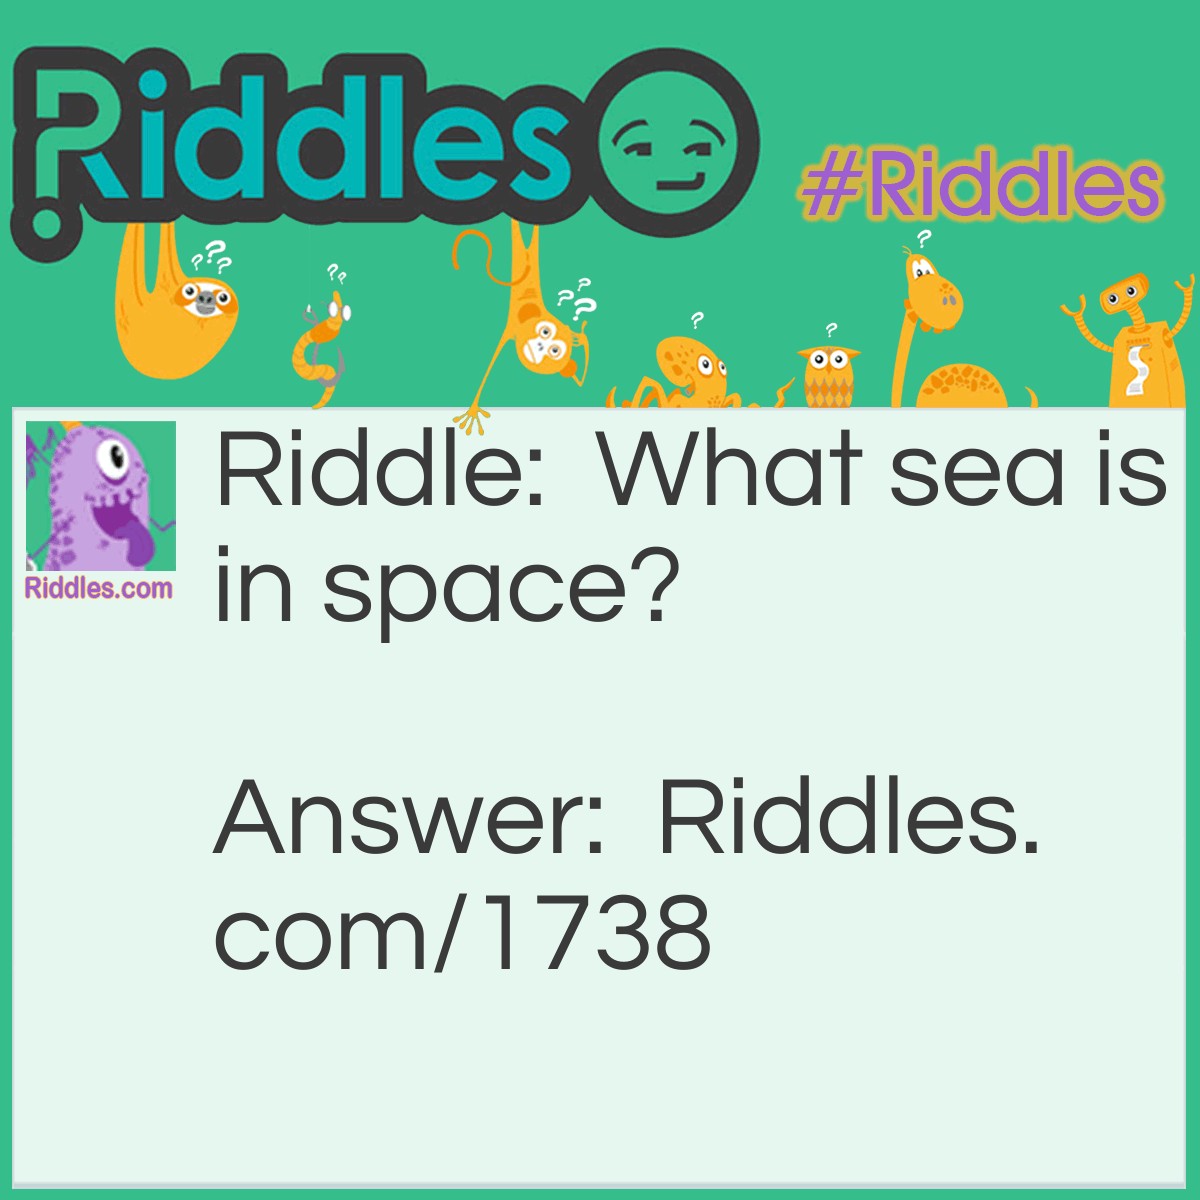 Riddle: What sea is in space? Answer: The galax-sea.